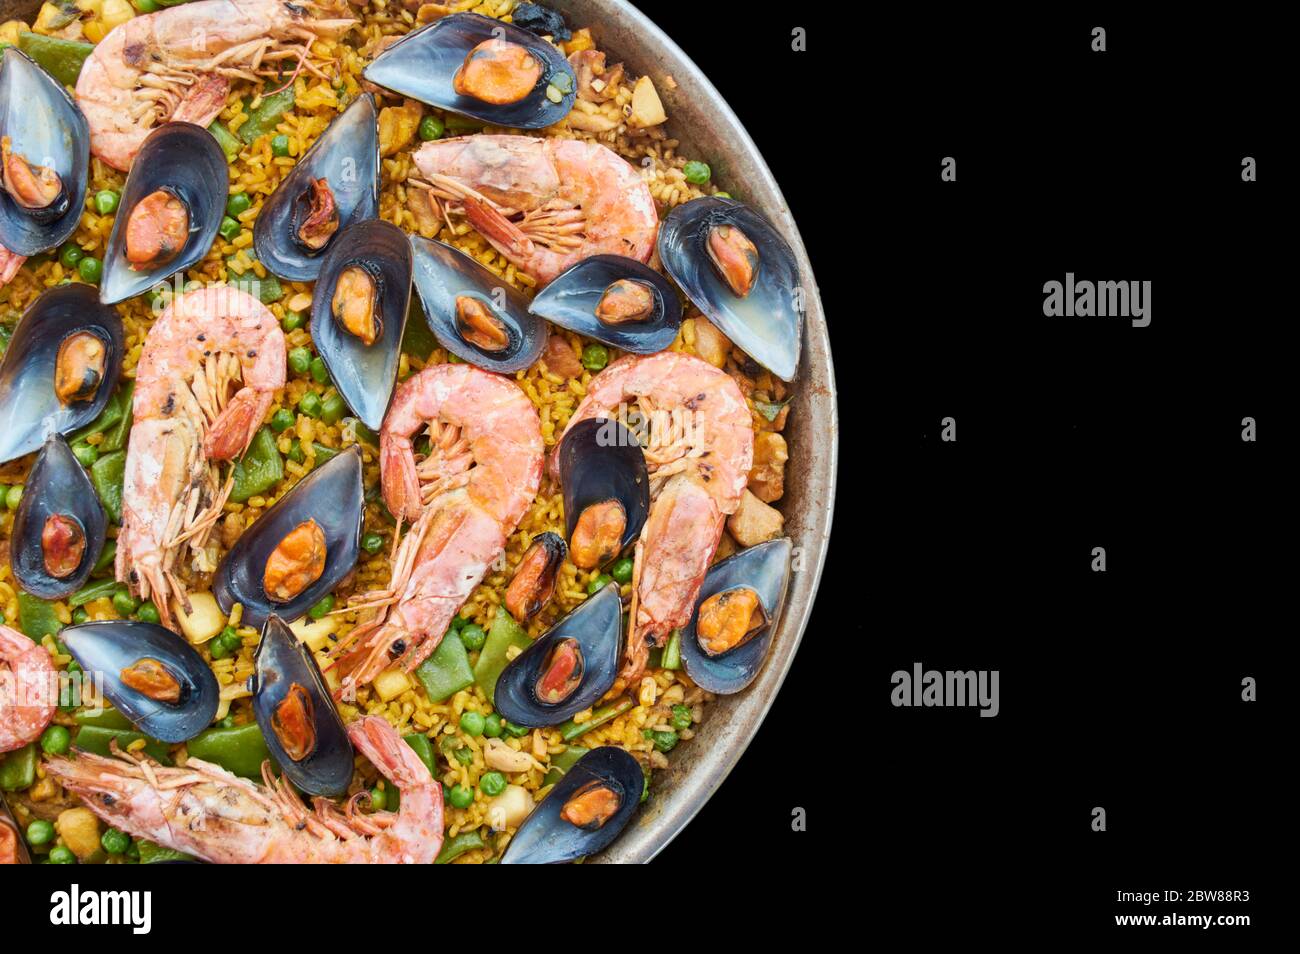 transparency cut, black background, paella typical Spanish food, with seafood vegetable meat, and rice Stock Photo